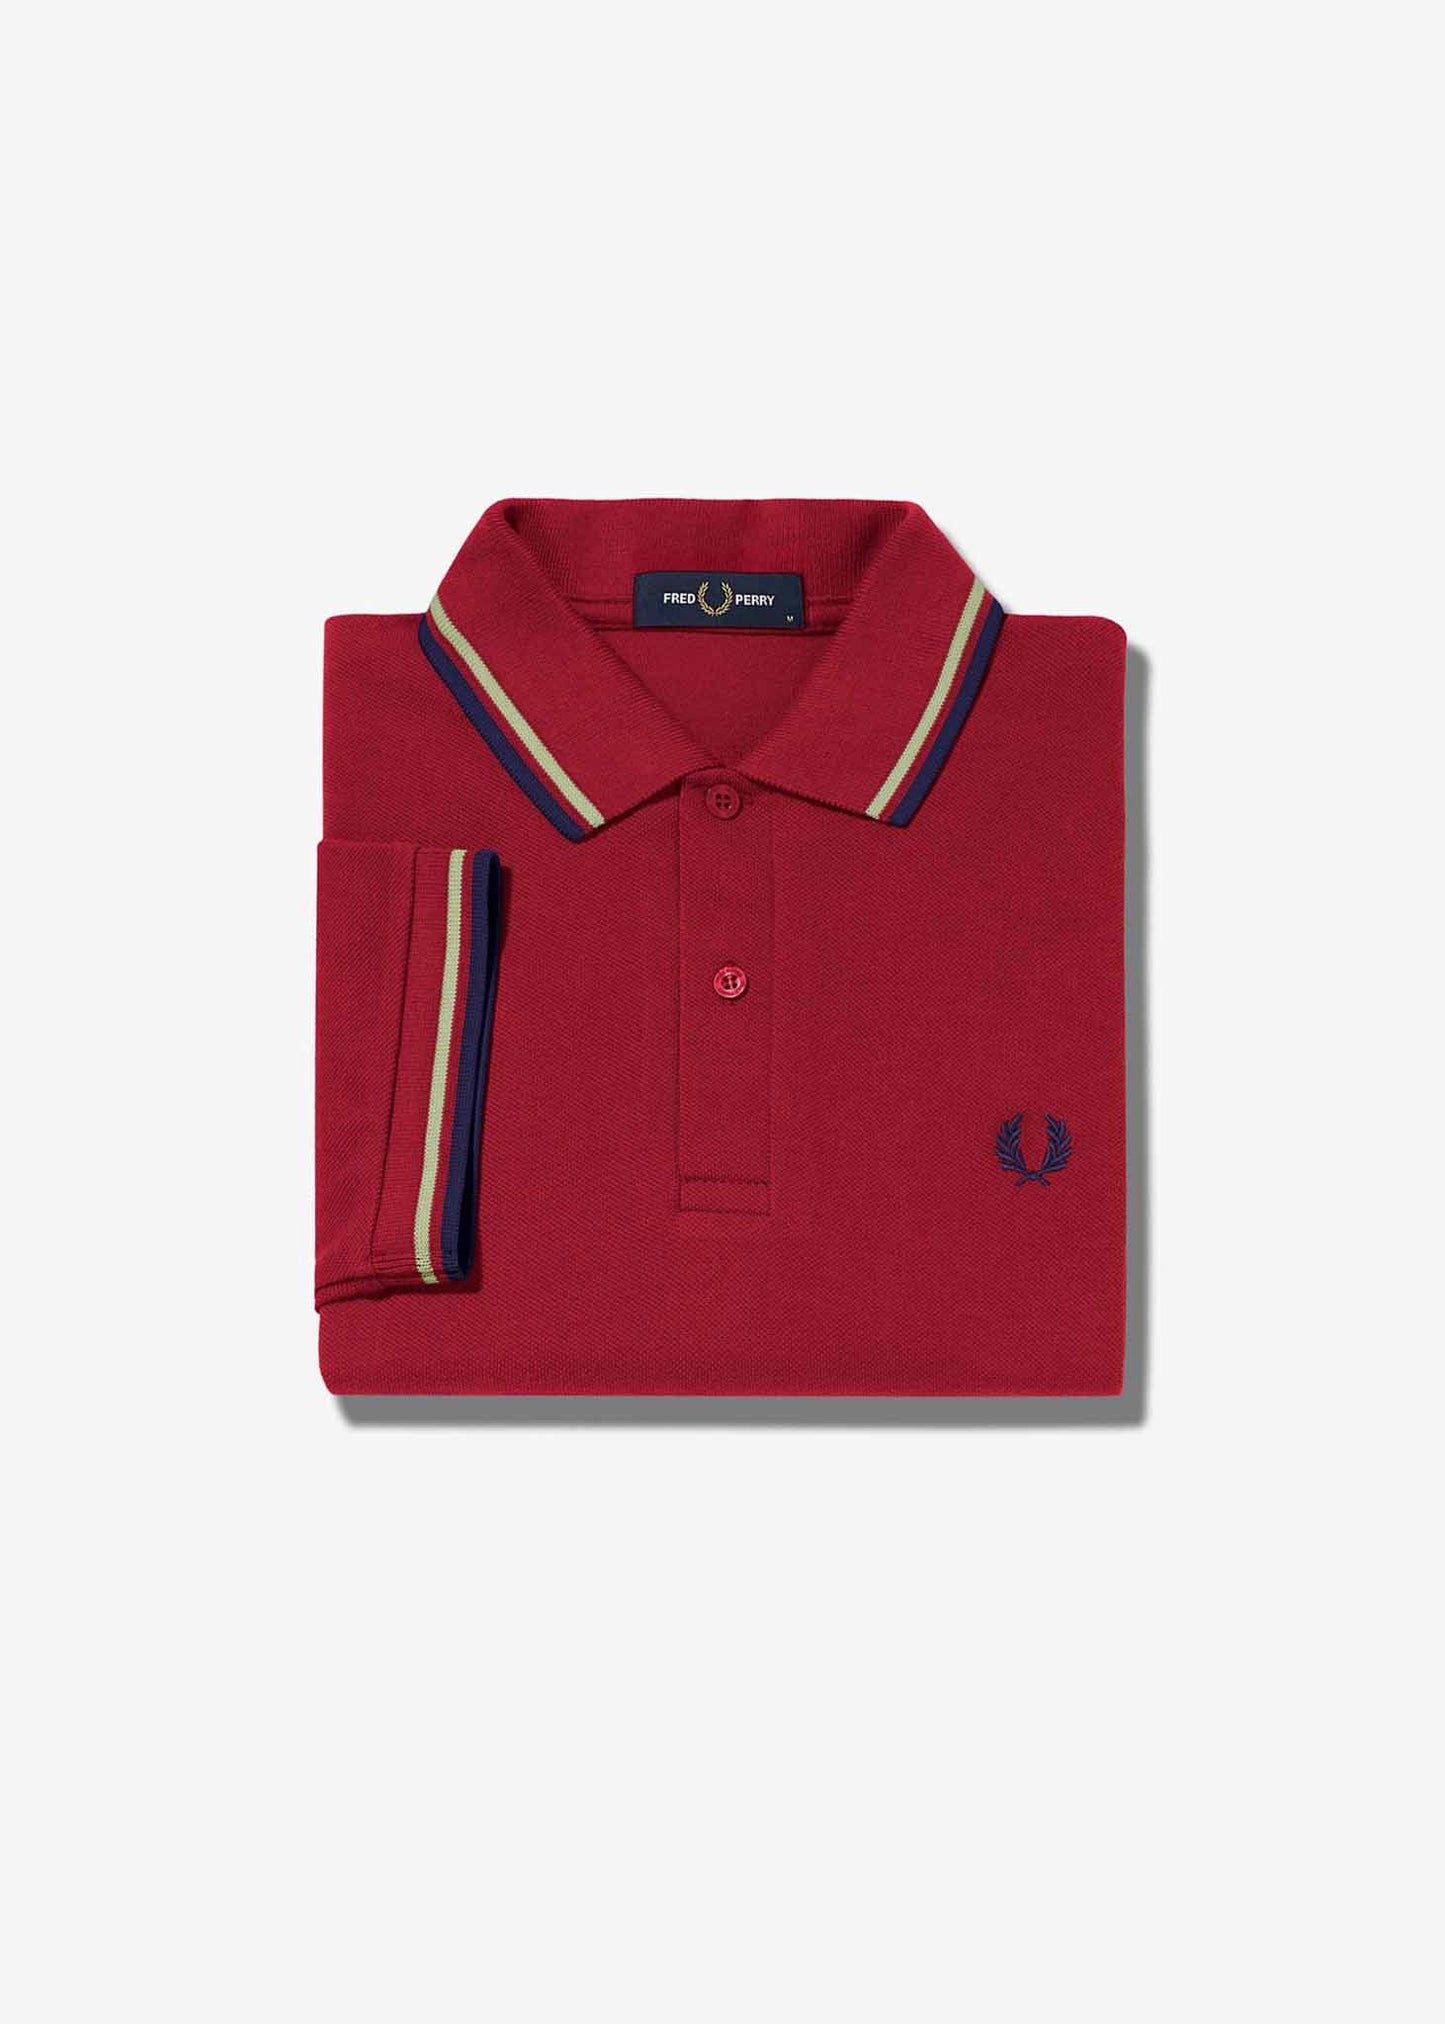 Twin tipped fred perry shirt - claret french navy